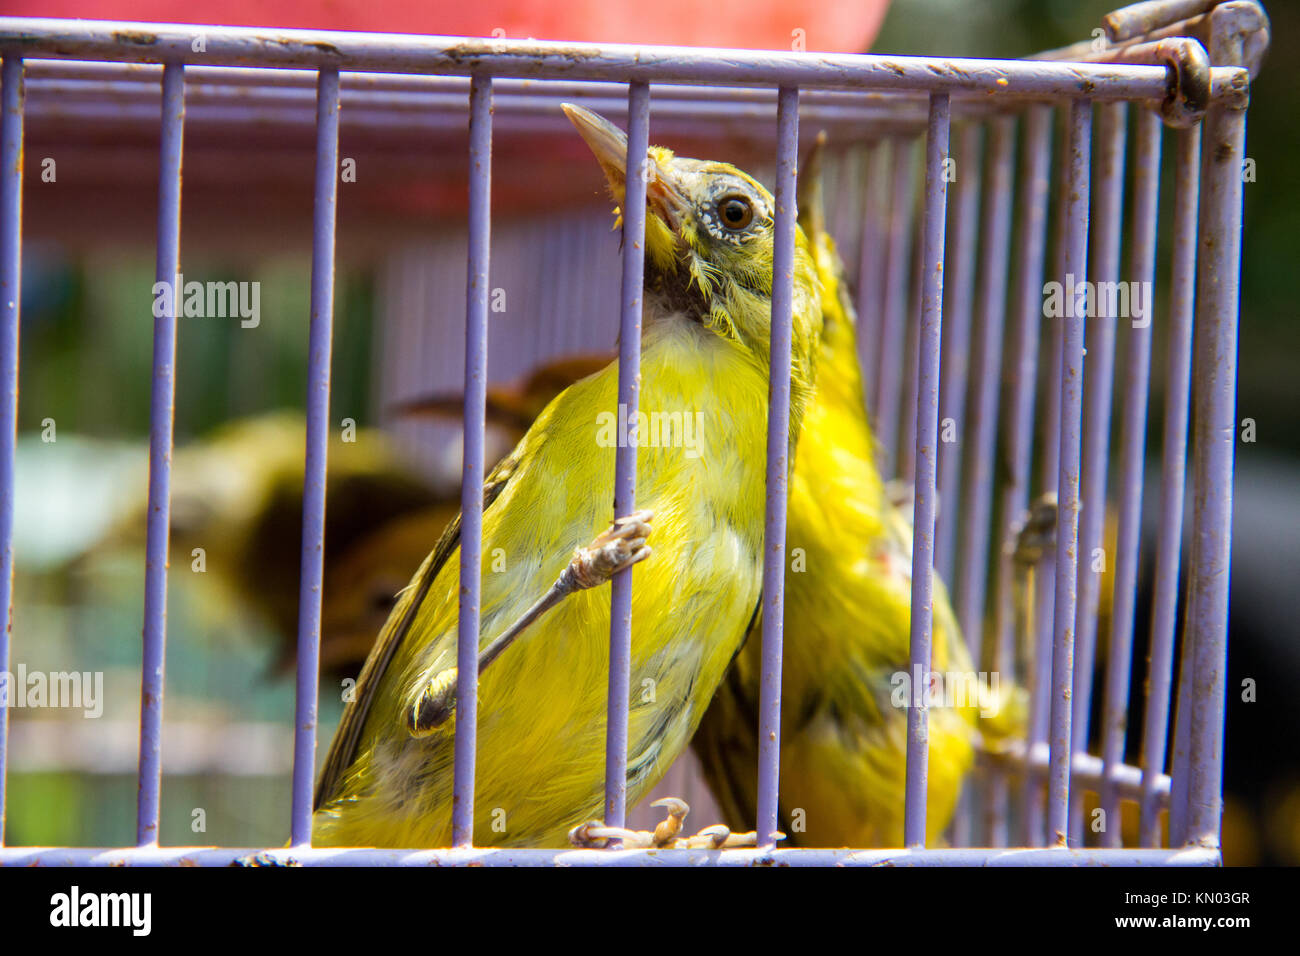 Bird clinging to bars of cage at bird market, Java, Indonesia Stock Photo